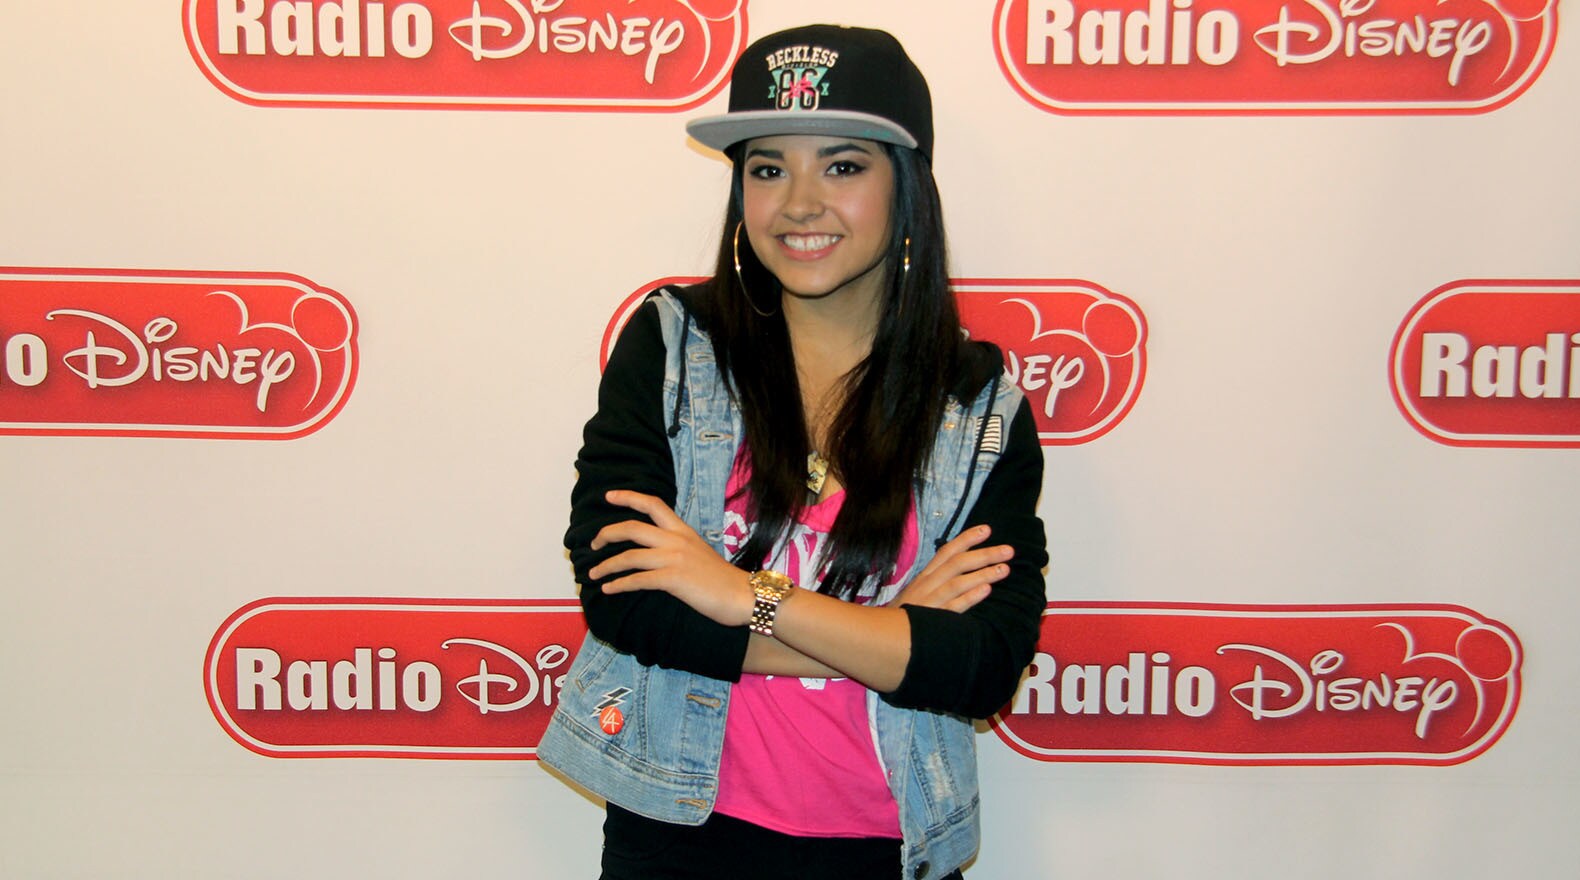 Check out Becky G styling in our studio!